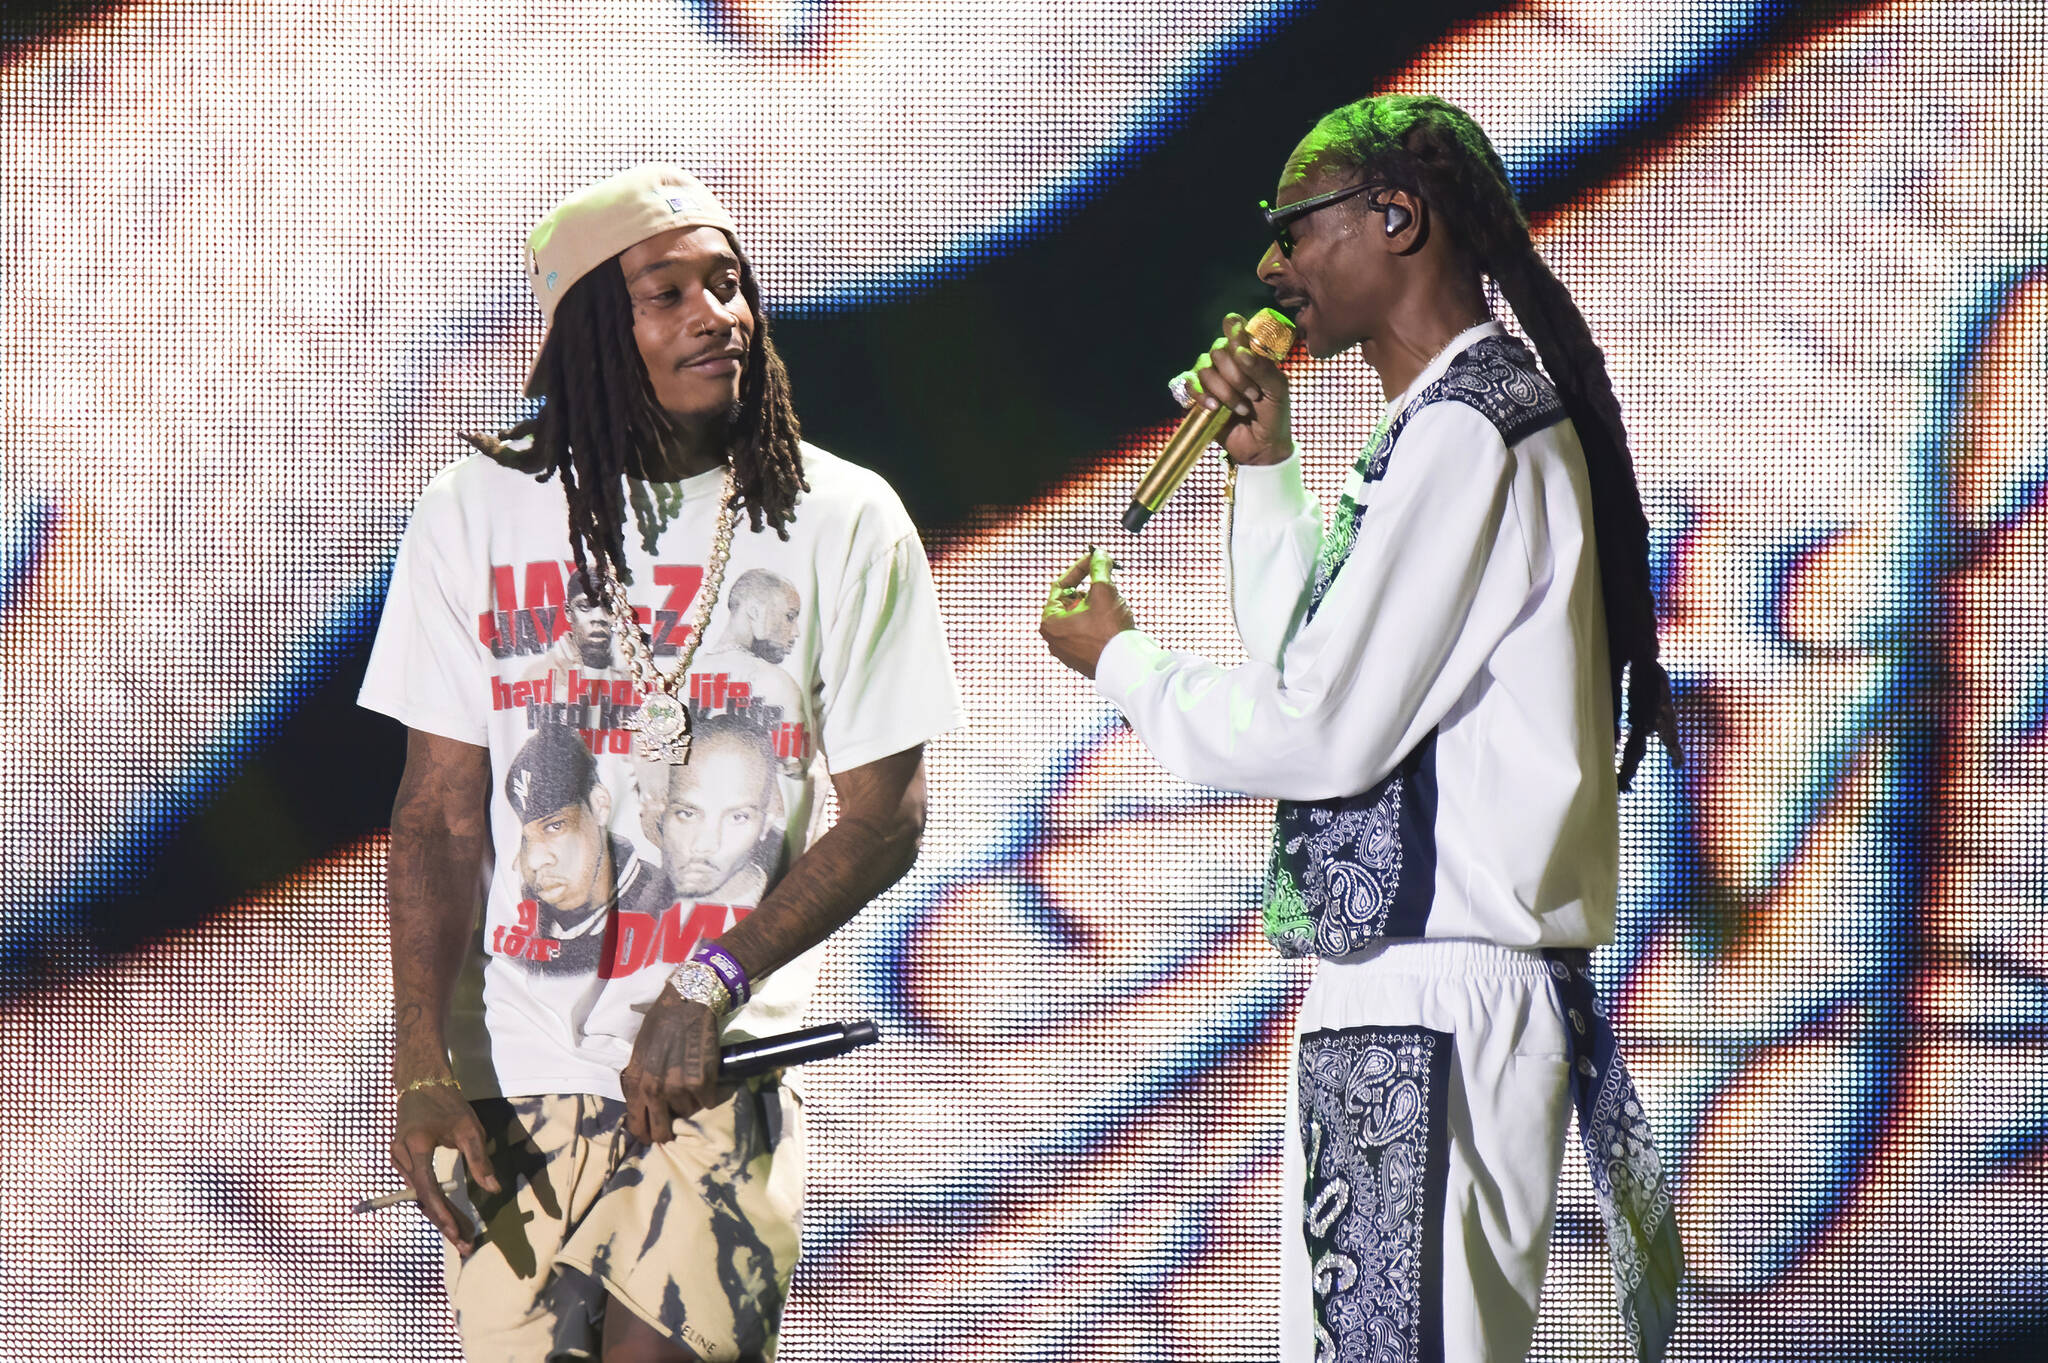 Rappers Wiz Khalifa, left, and Snoop Dogg perform at Hip-Hop 50 Live, celebrating 50 years of hip-hop on Friday, Aug. 11, 2023, at Yankee Stadium in the Bronx borough of New York. (Photo by Scott Roth/Invision/AP)